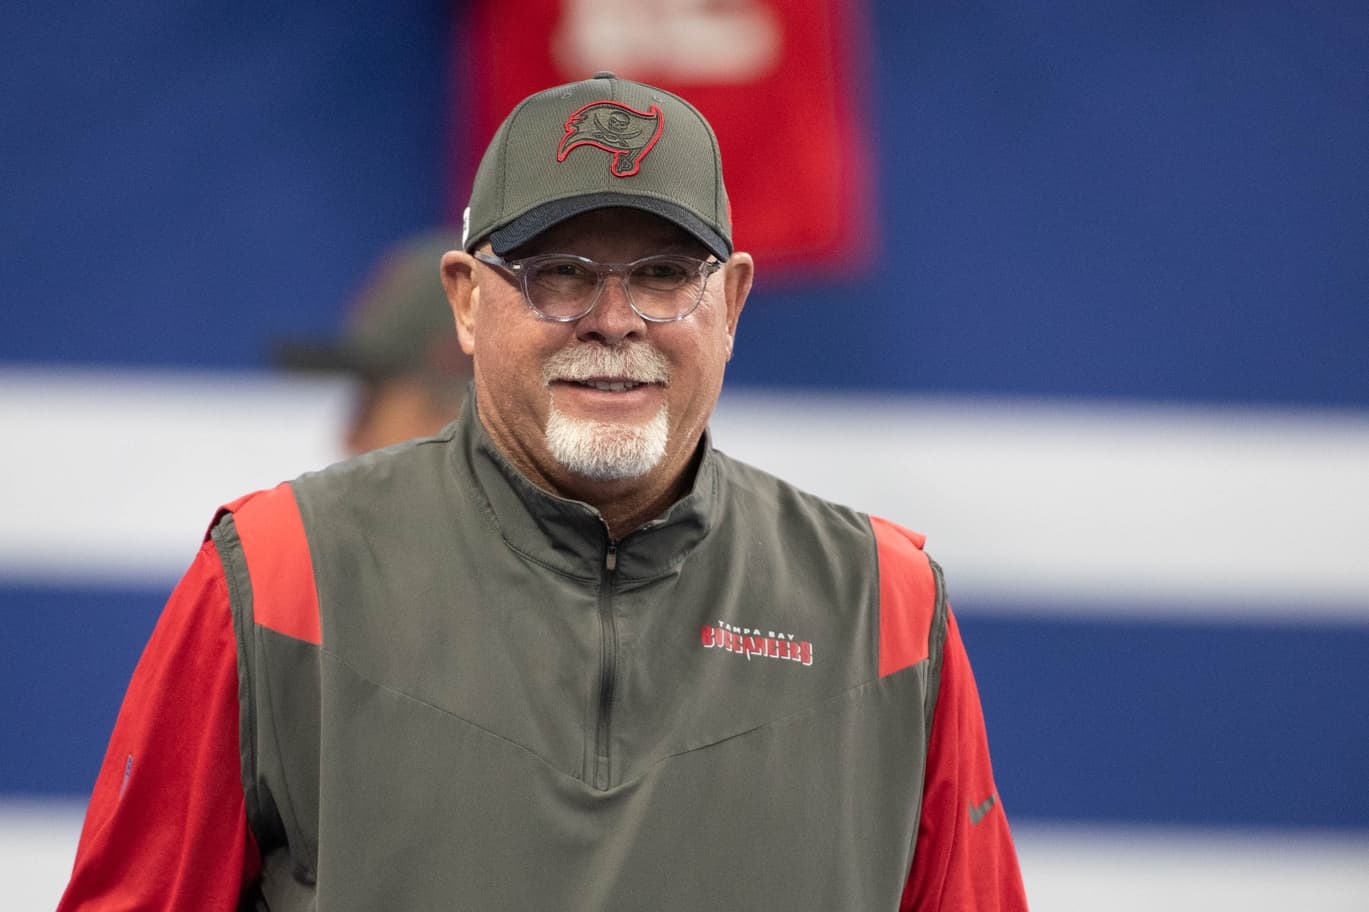 Bruce Arians Retires: Is Hall of Fame the next stop for Tampa Bay